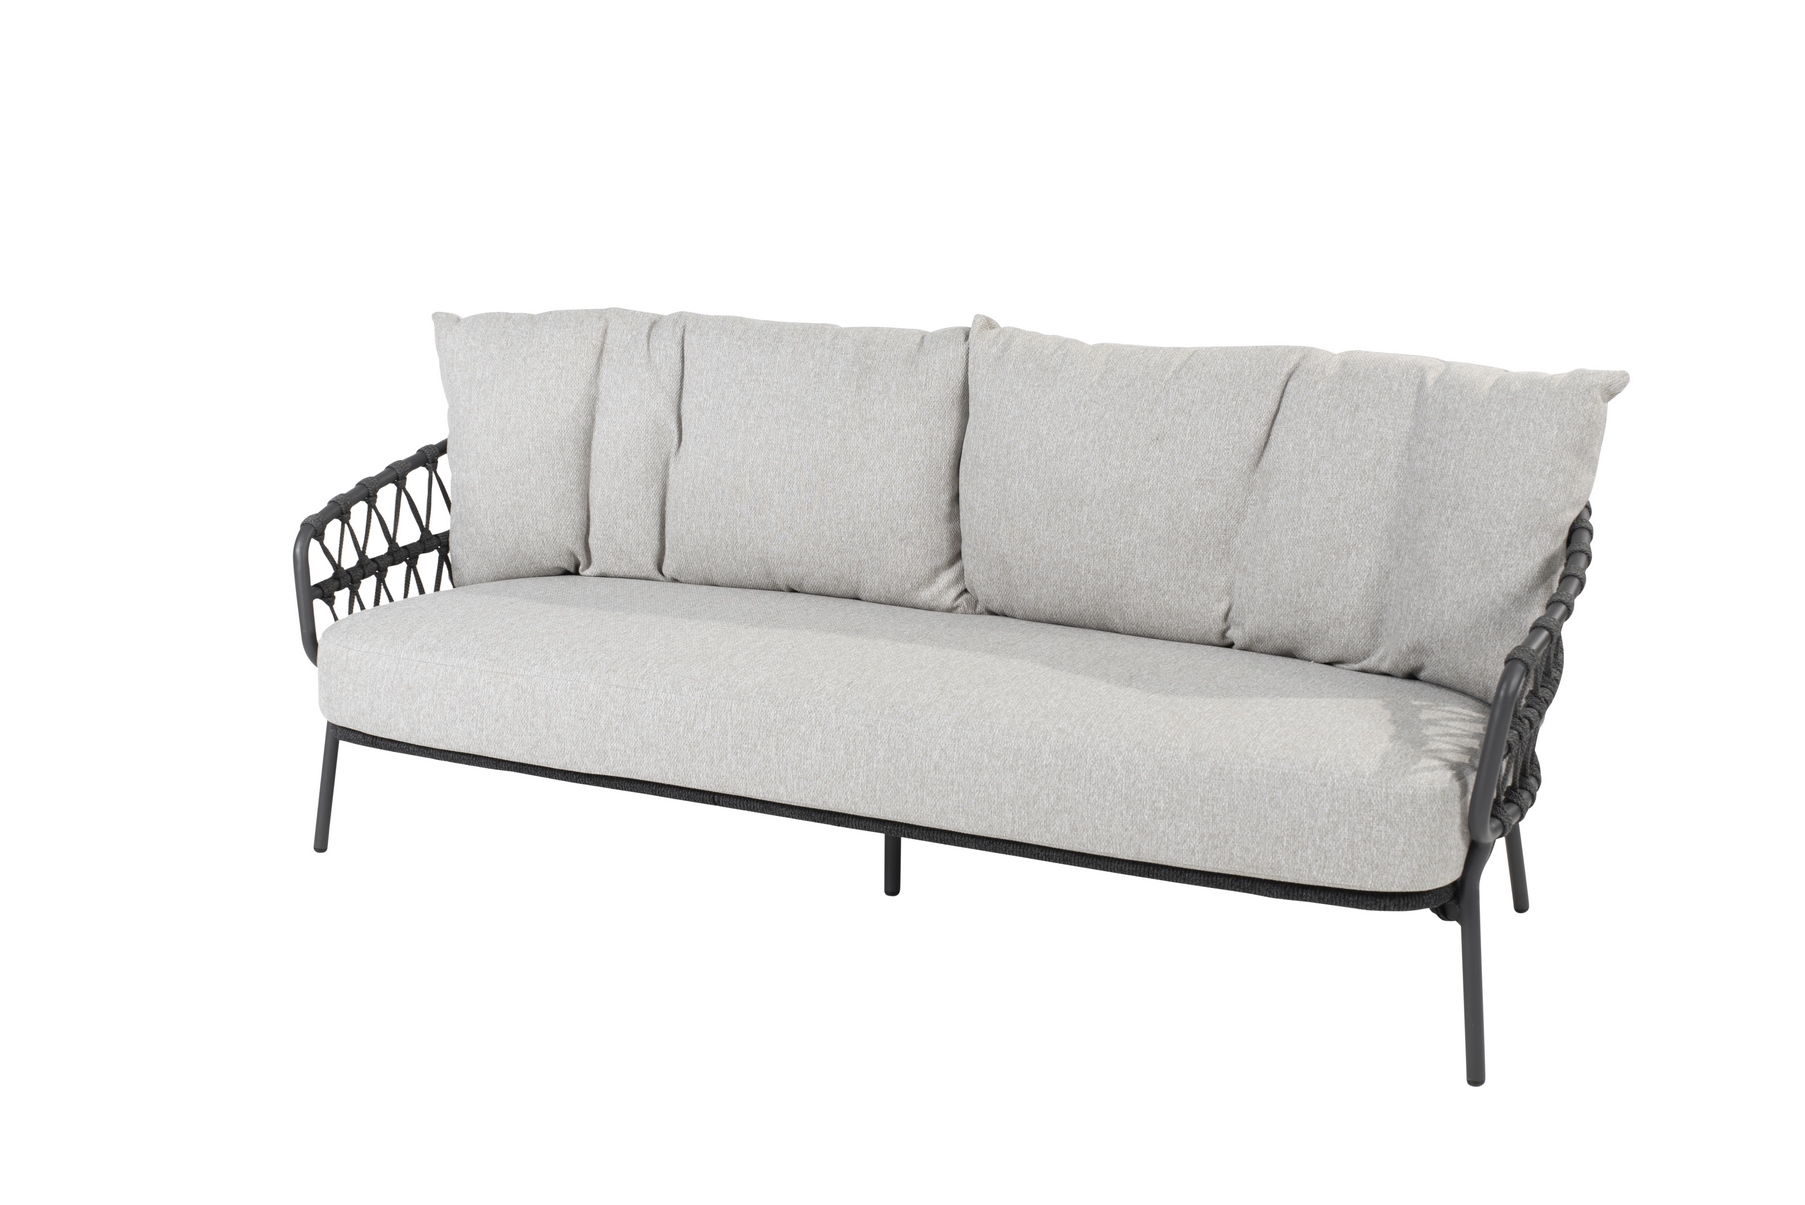 213892__Calpi_living_bench_3_seater_with_3_cushions_011.jpg